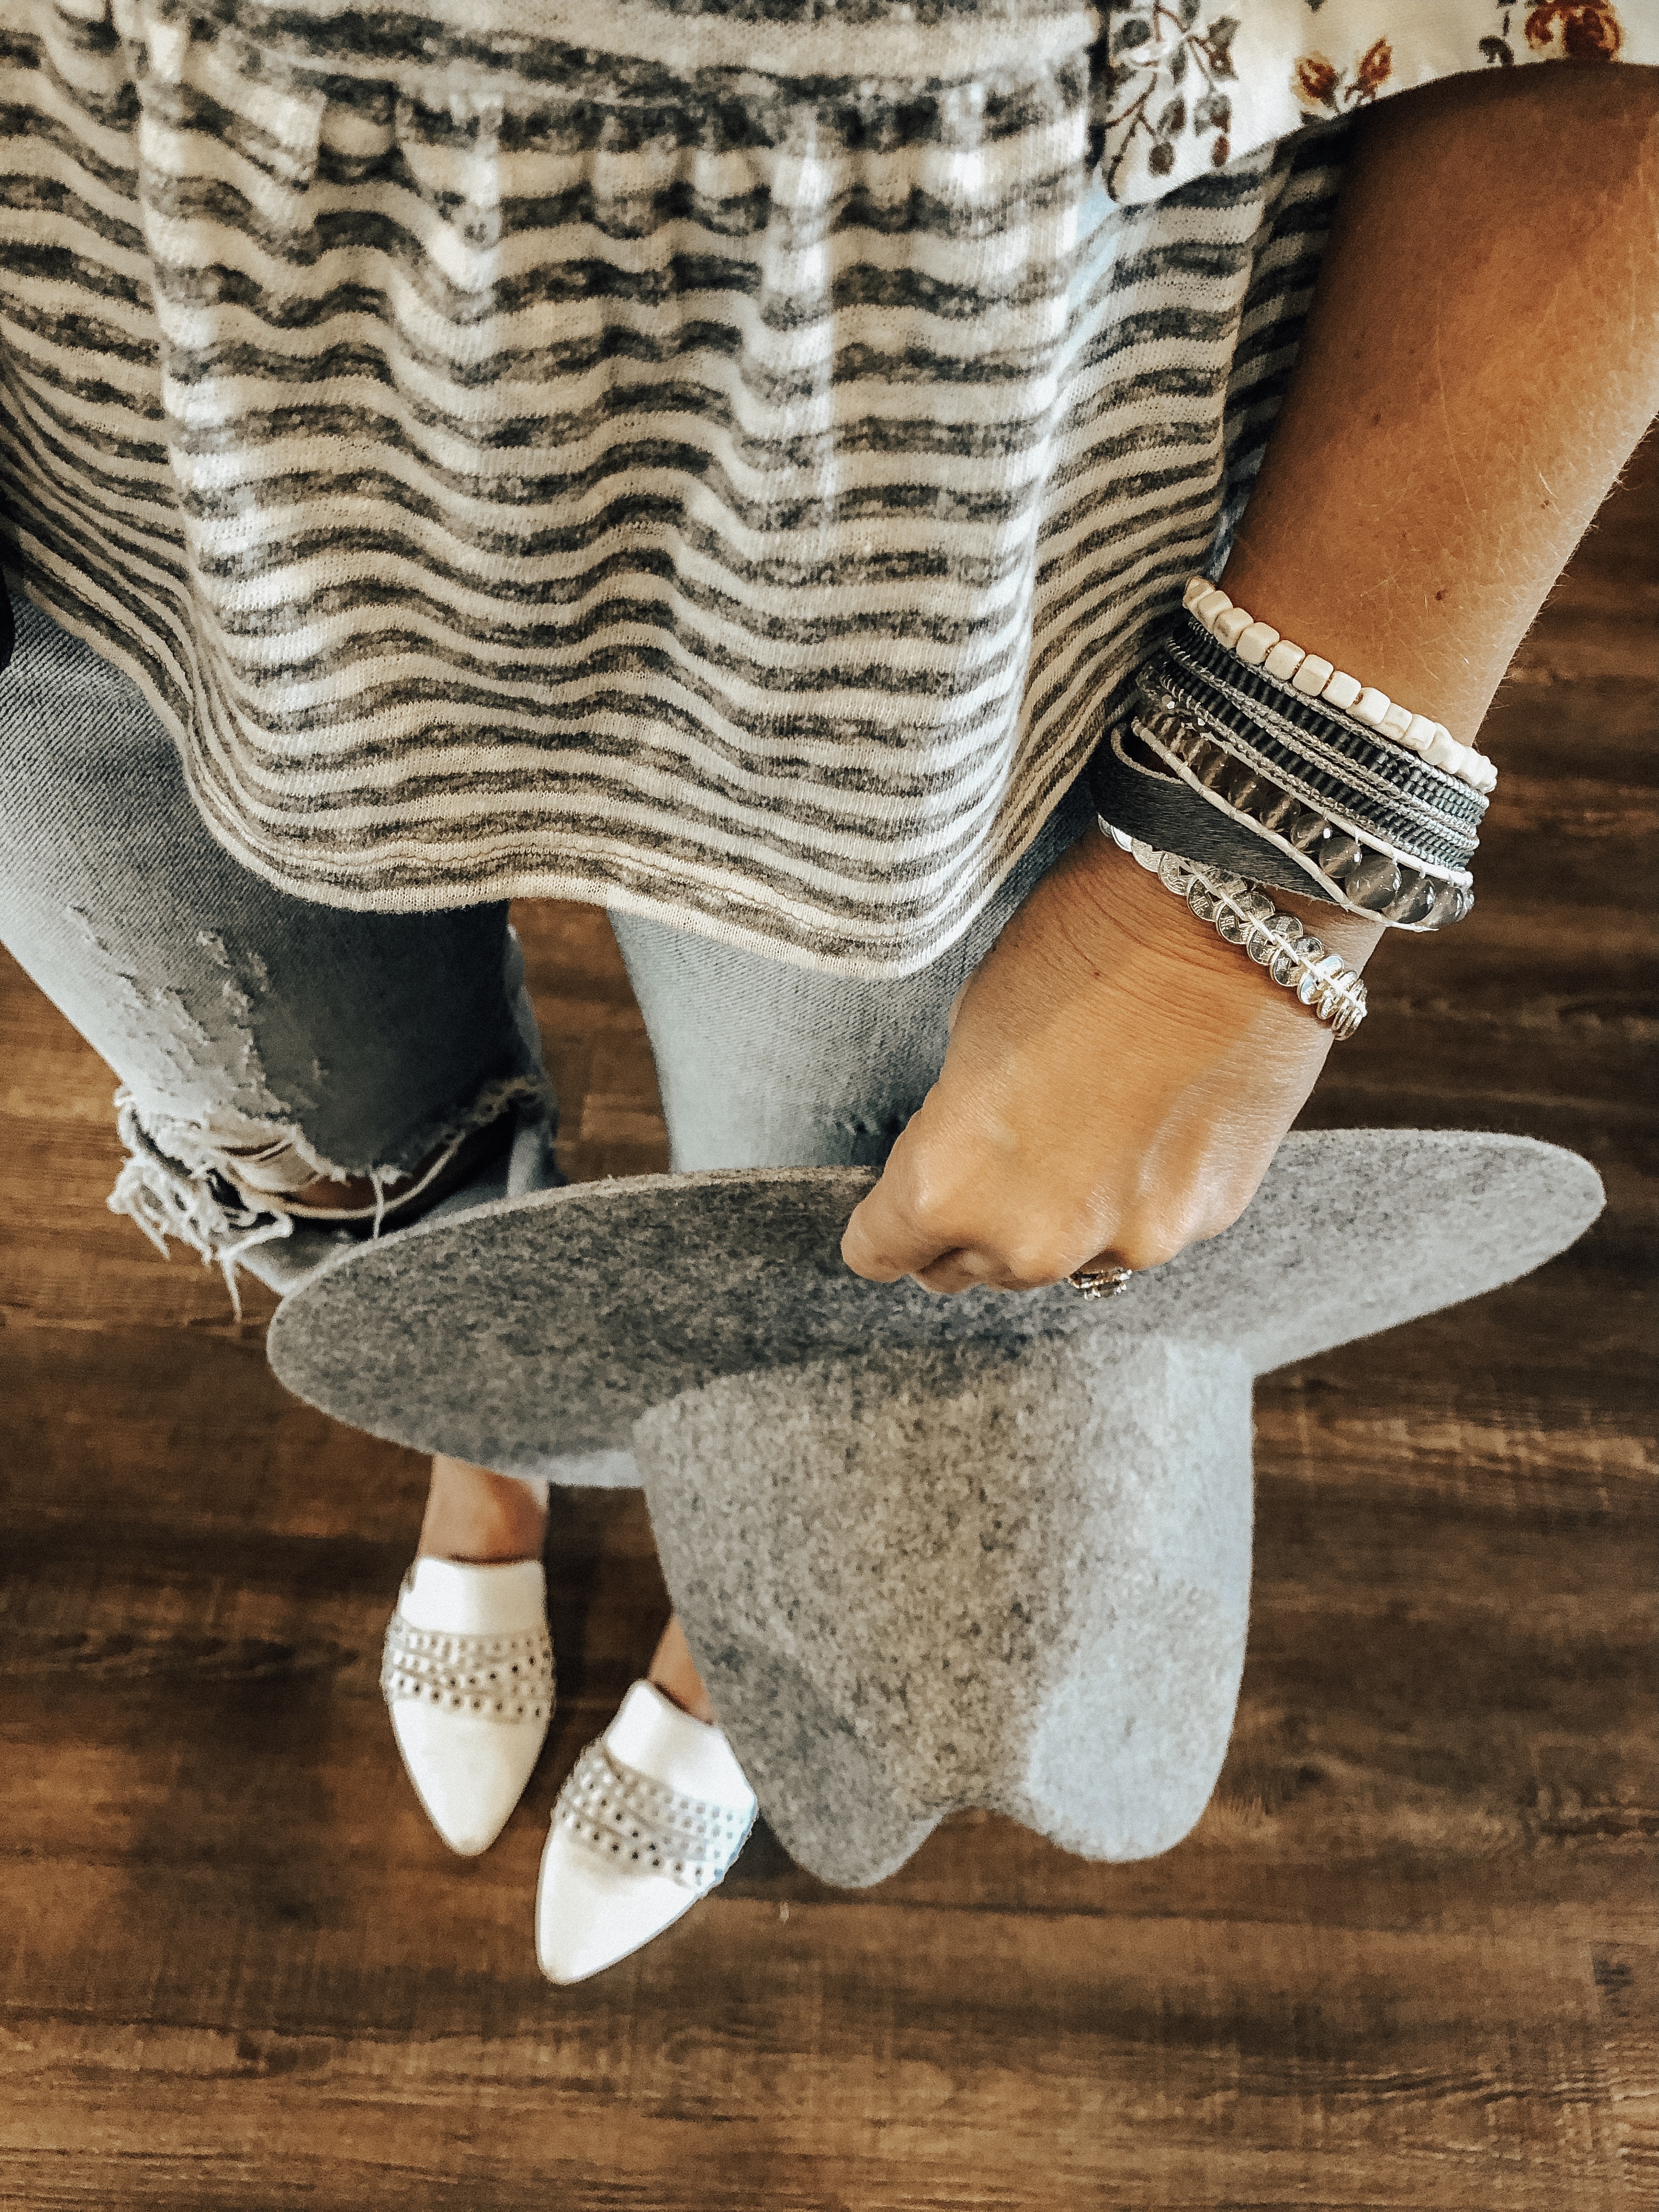 BOHO BRACELETS + VICTORIA EMERSON- Jaclyn De Leon Style + bohemian style + bracelet stack + jewelry trends + how to style accessories + summer outfit + fall style + mom style + grey fedora hat + coffee shop + stying tips + distressed denim + peplum top + floral button up